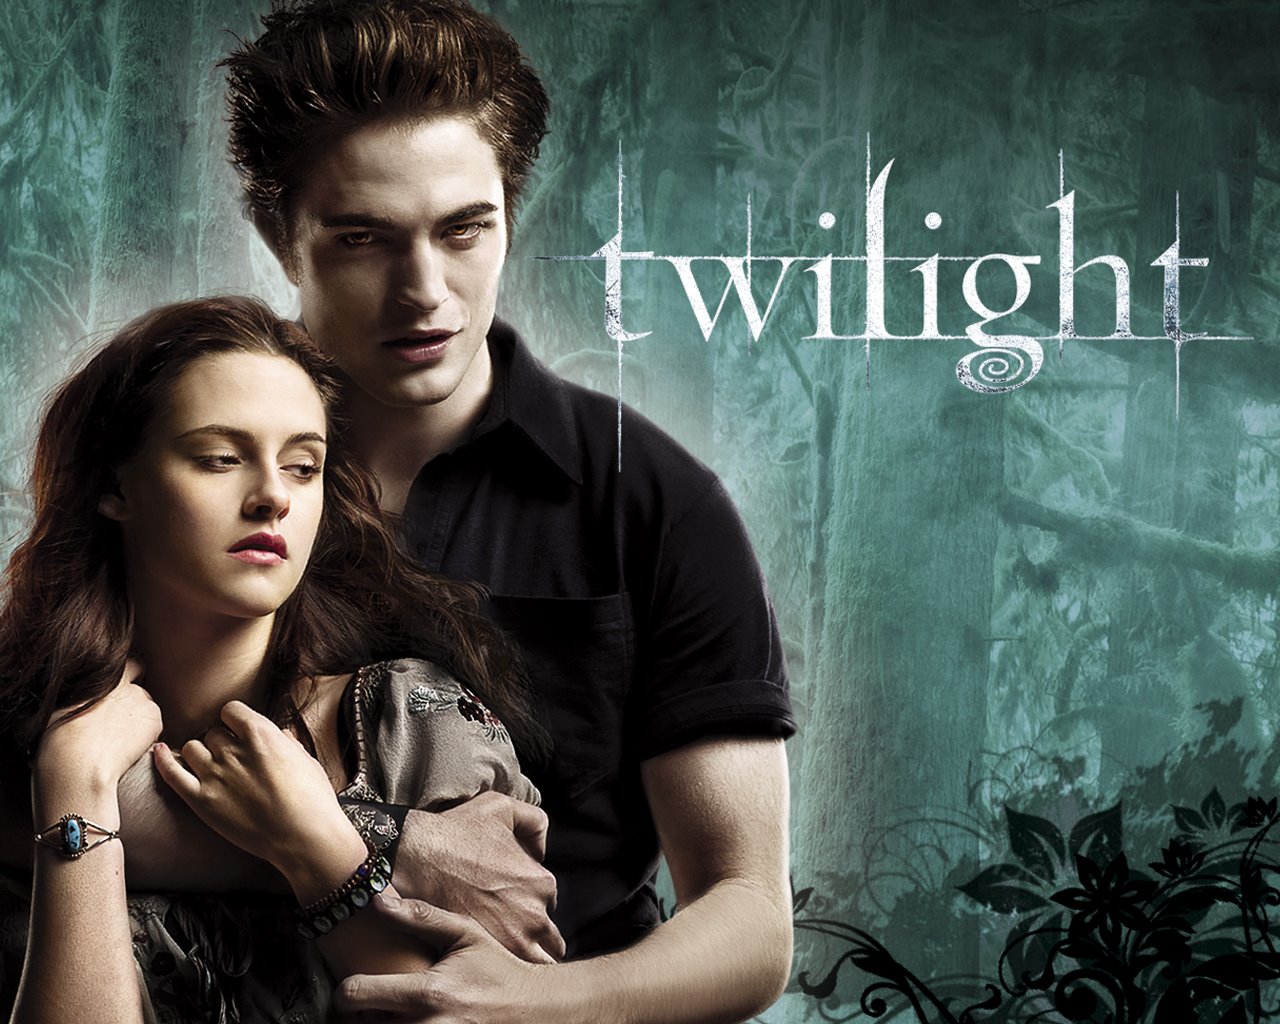 24/7: Twilight Could Get More Sequels After Breaking Dawn Part 2